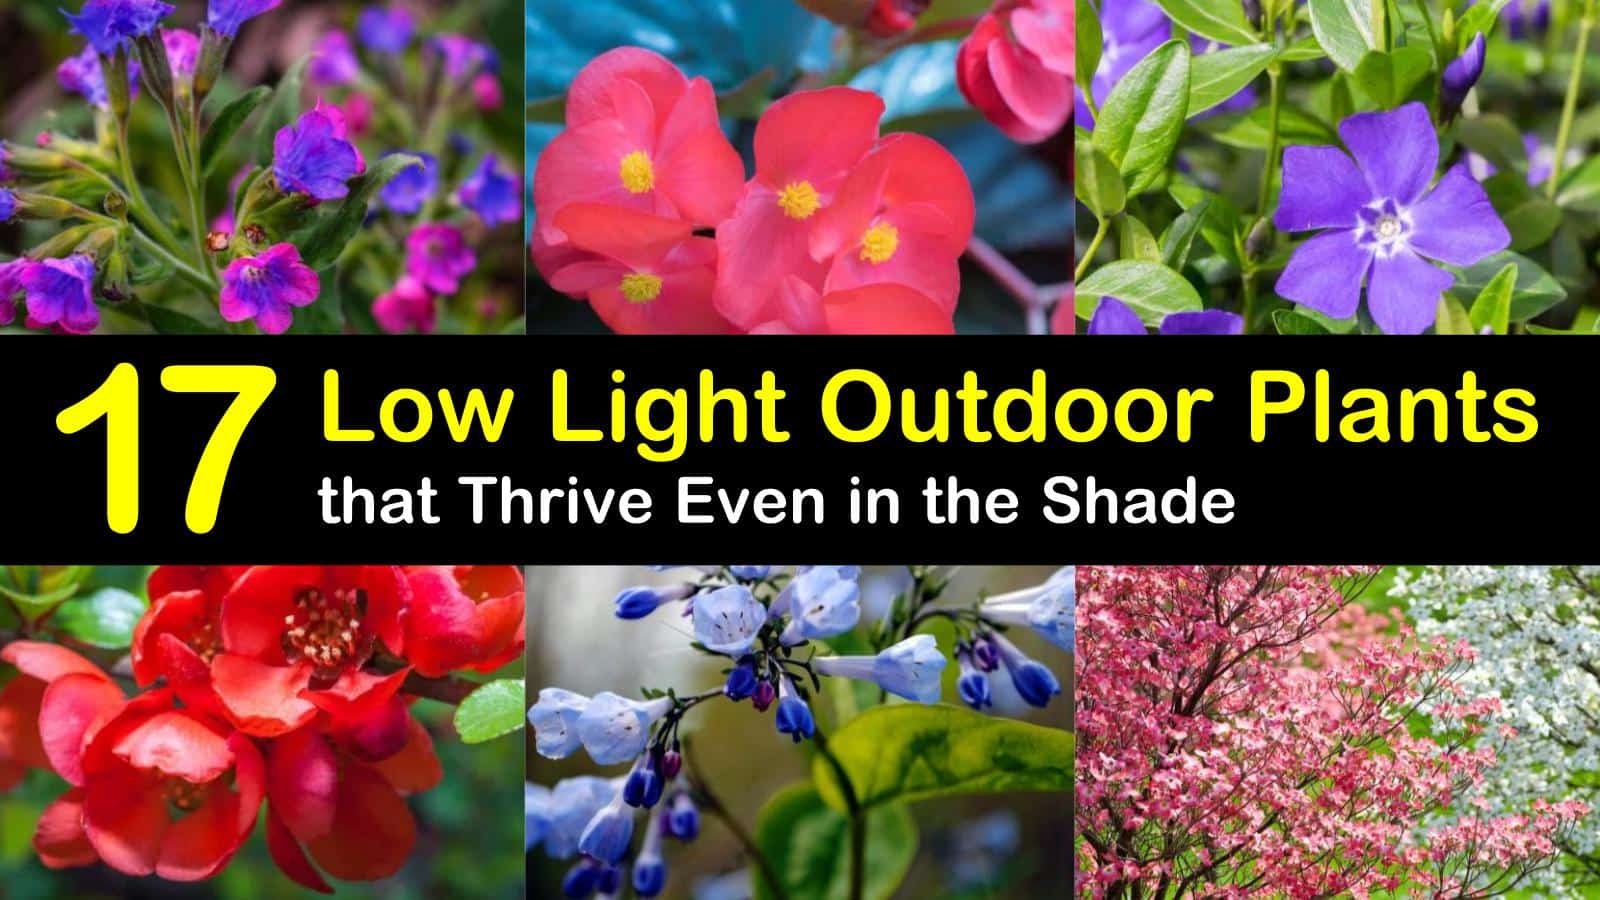 17 Low Light Outdoor Plants That Thrive, Outdoor Plants That Does Not Need Sunroof